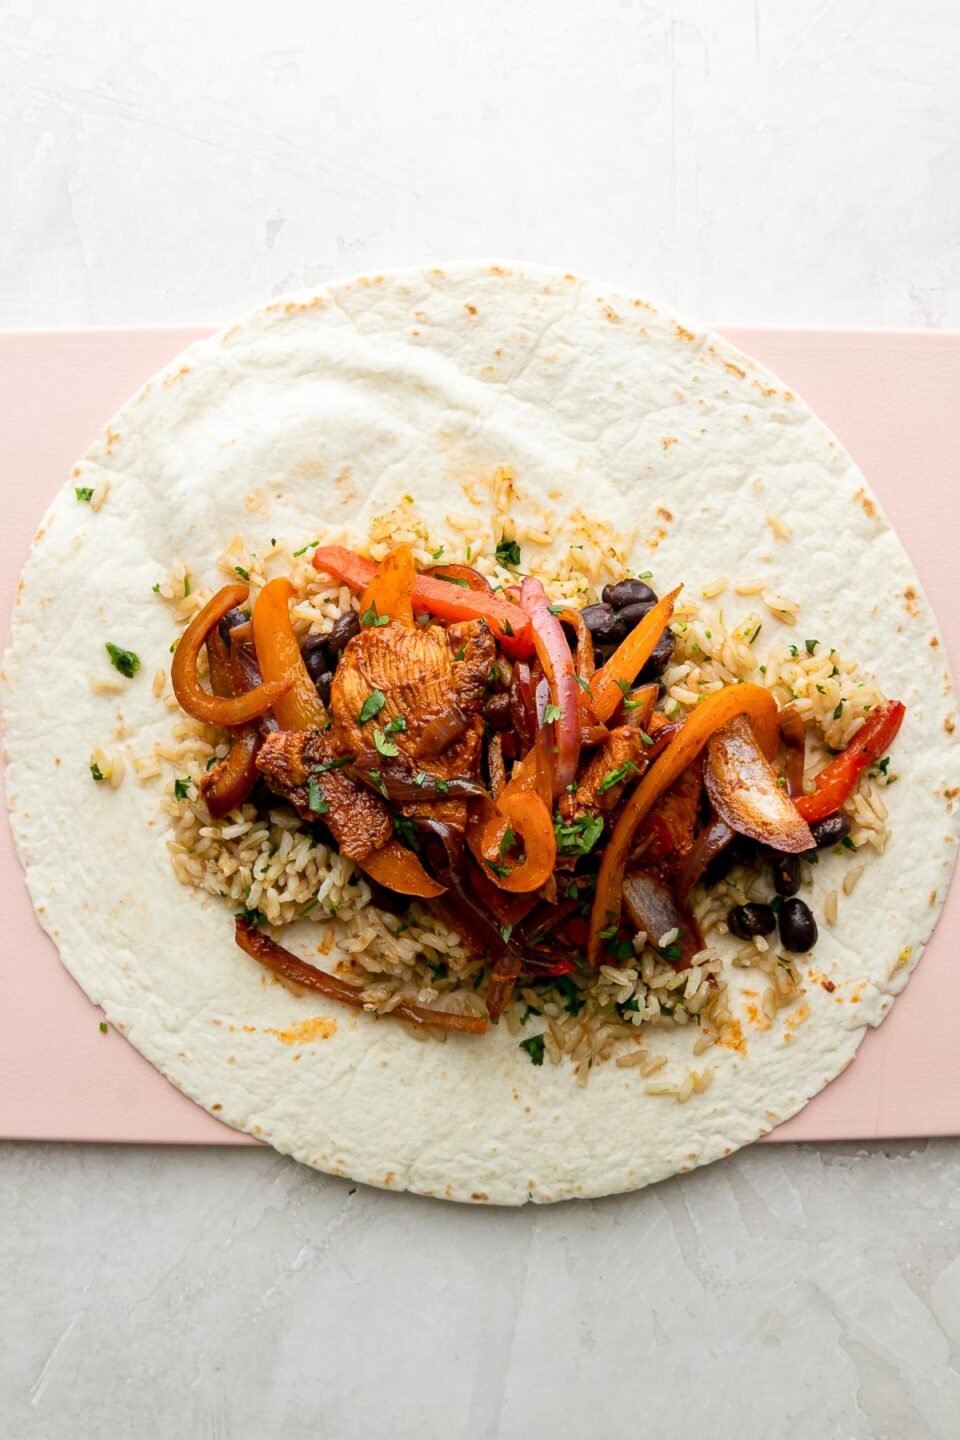 How to make chicken fajita burritos, step 5: Burrito assembly. A fajita burrito has been built atop a large flour tortilla. The tortilla sits flat on a pink plastic cutting board and the cutting board sits atop a creamy white textured surface.